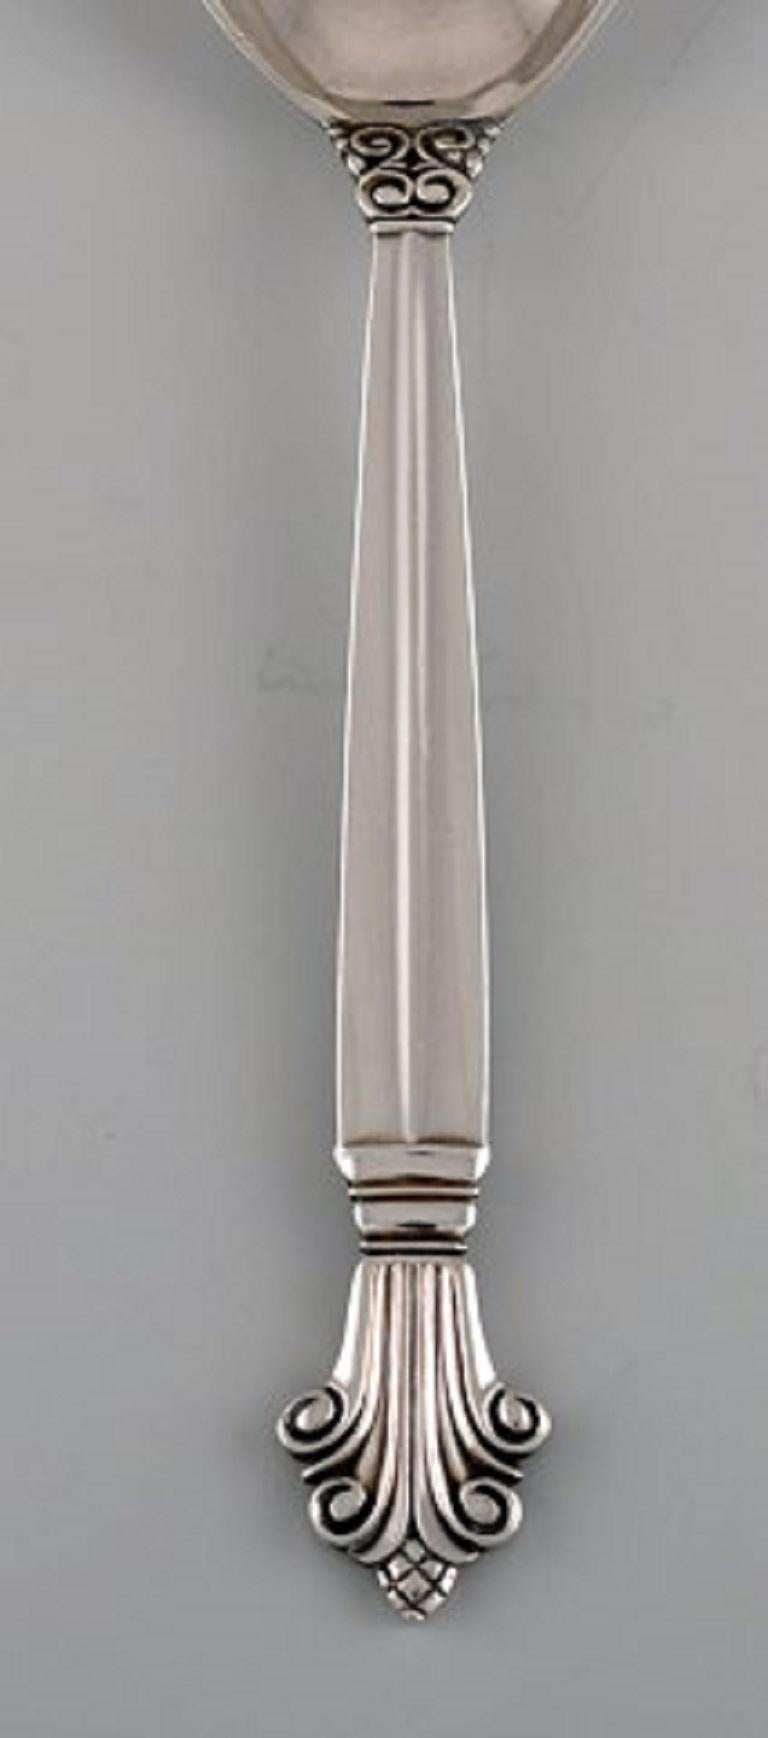 Georg Jensen Acanthus serving spoon in sterling silver.
Measures: Length 17 cm.
Stamped.
In excellent condition.
Our skilled Georg Jensen silversmith / jeweler can polish all silver and gold so that it appears as new. The price is very